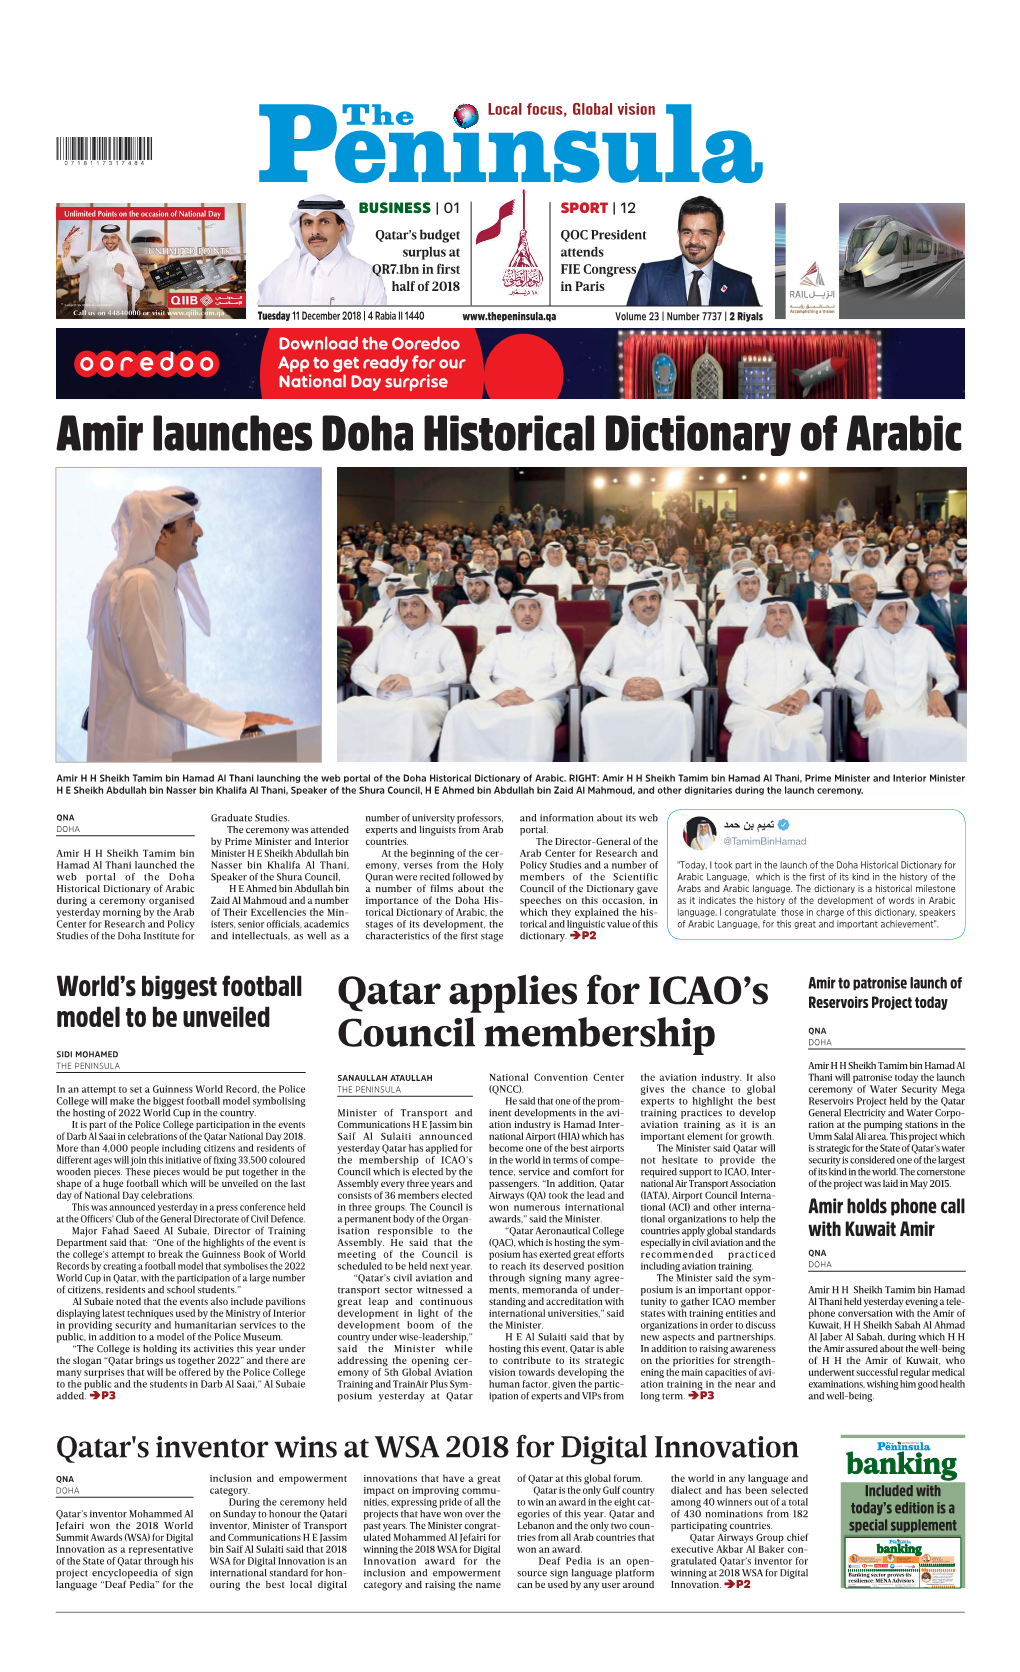 Amir Launches Doha Historical Dictionary of Arabic